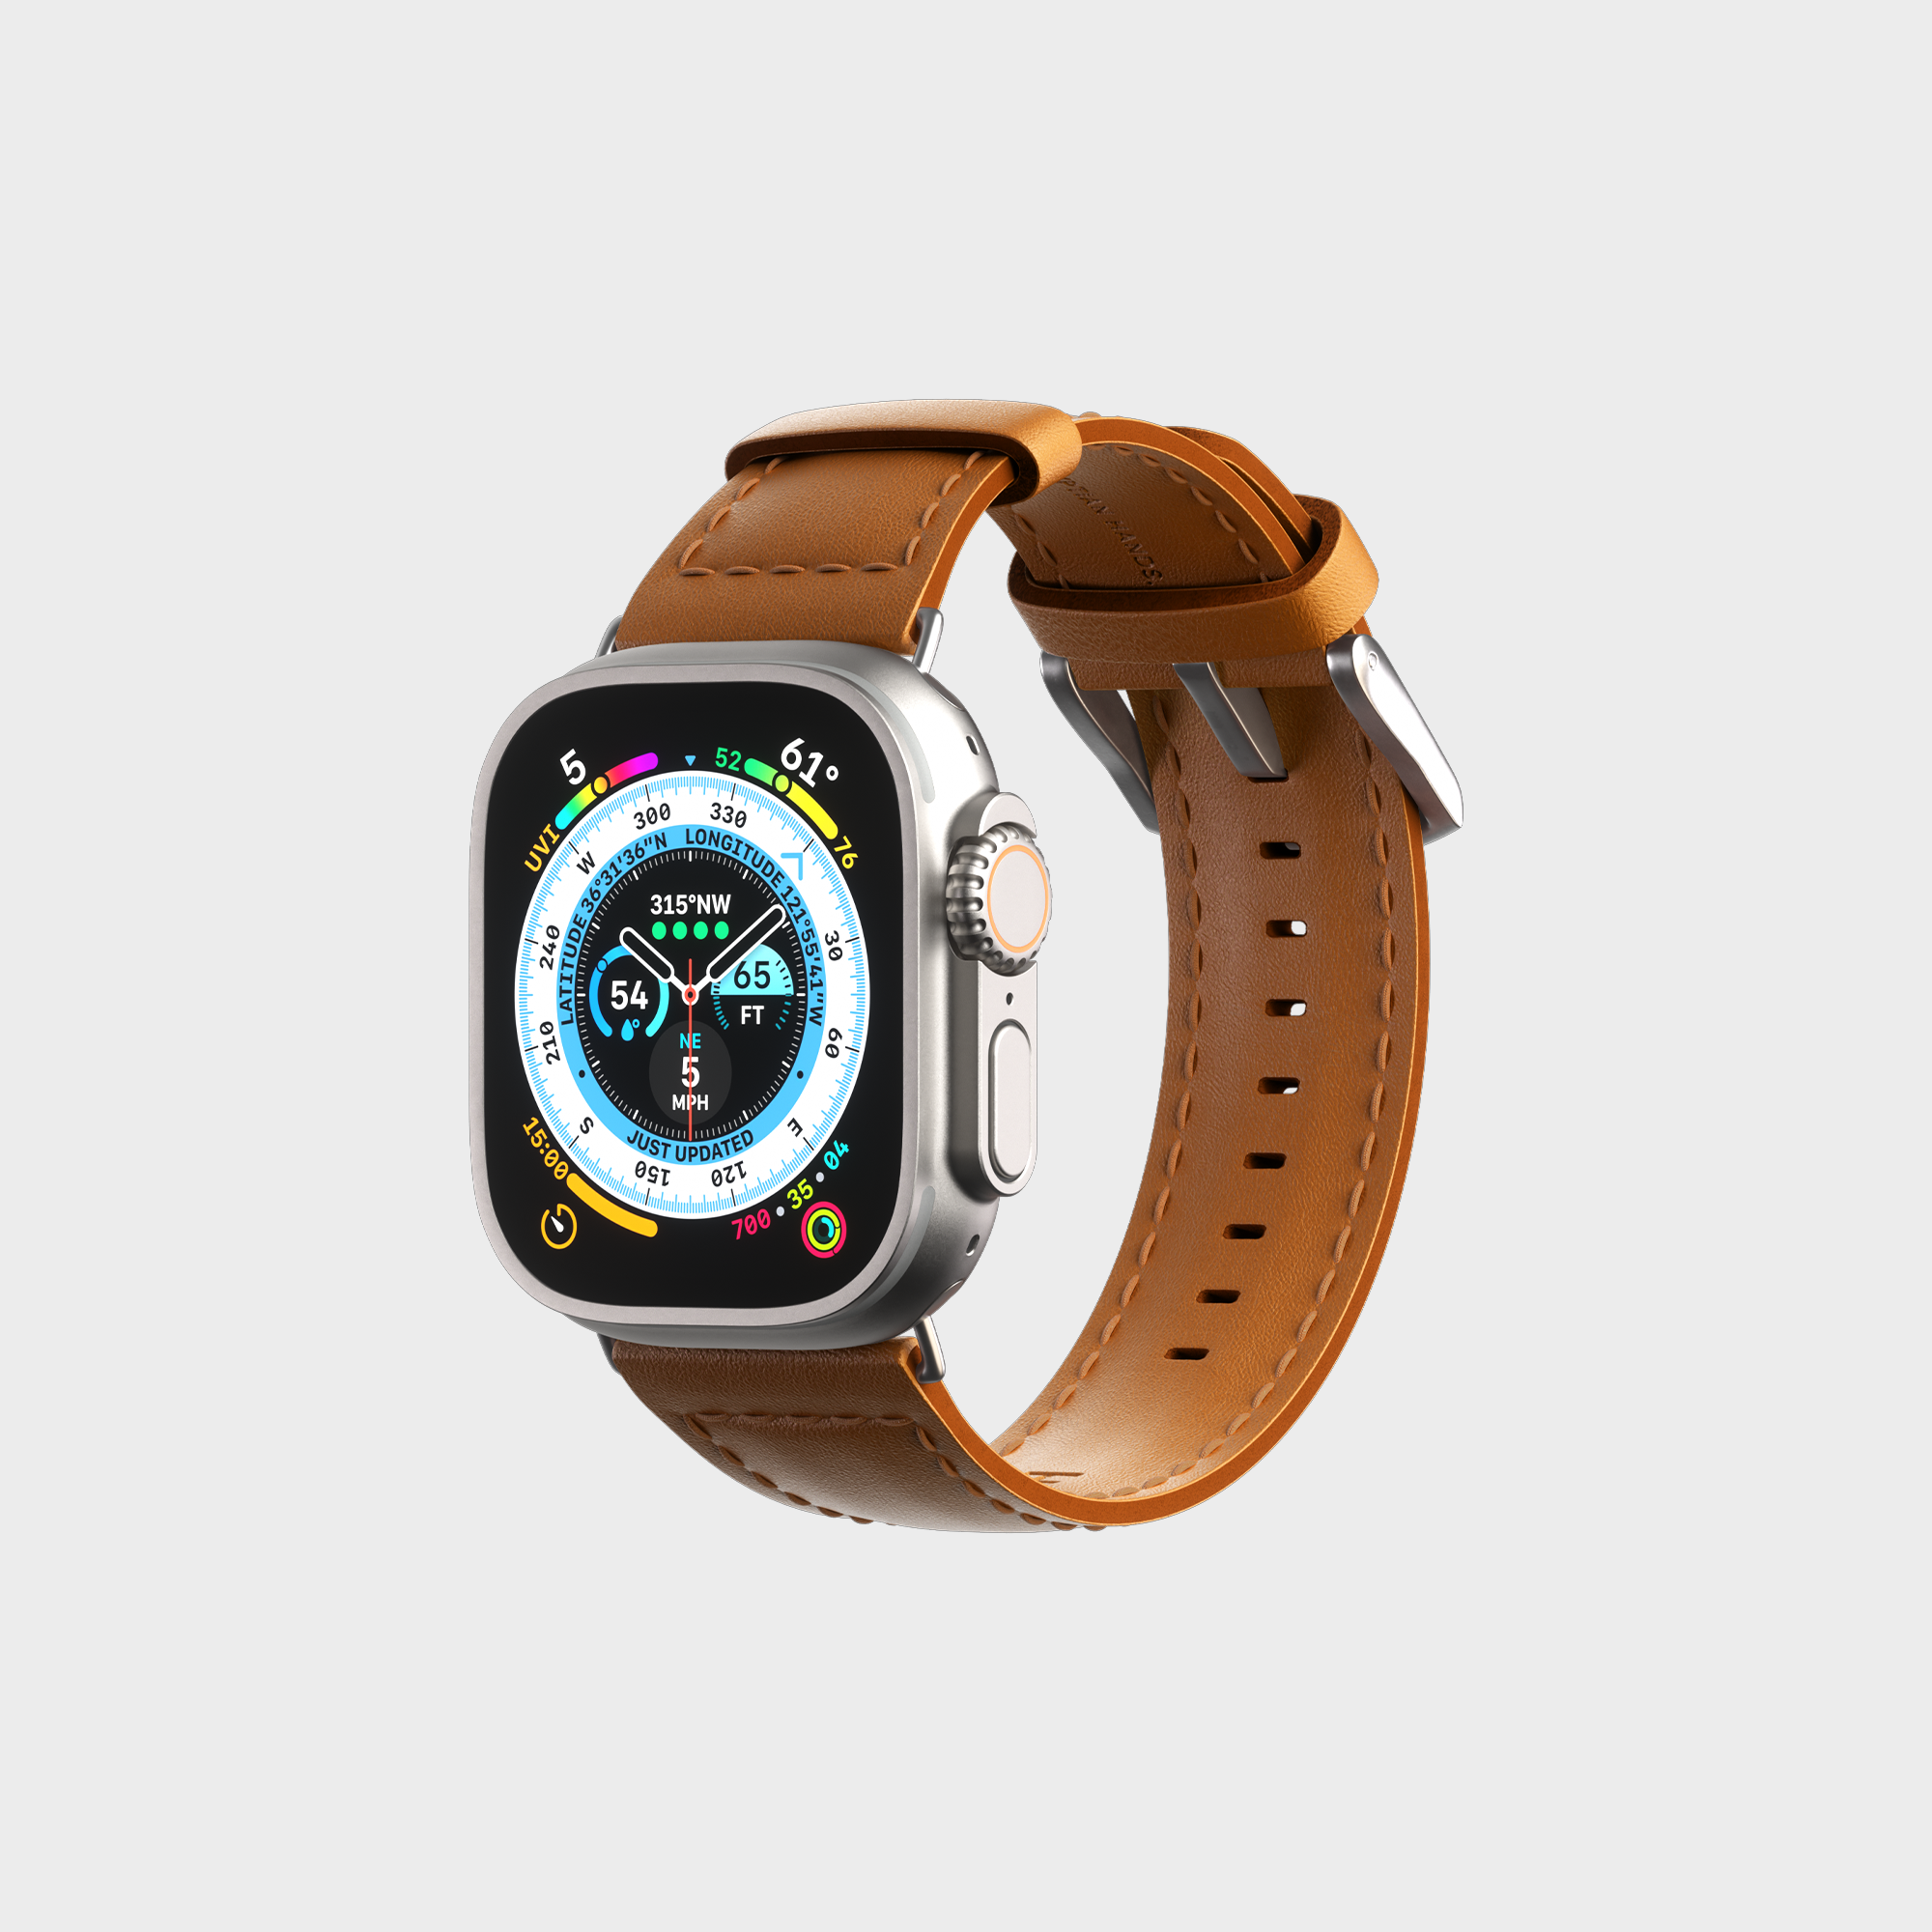 Smartwatch with leather strap and digital compass display on white background.